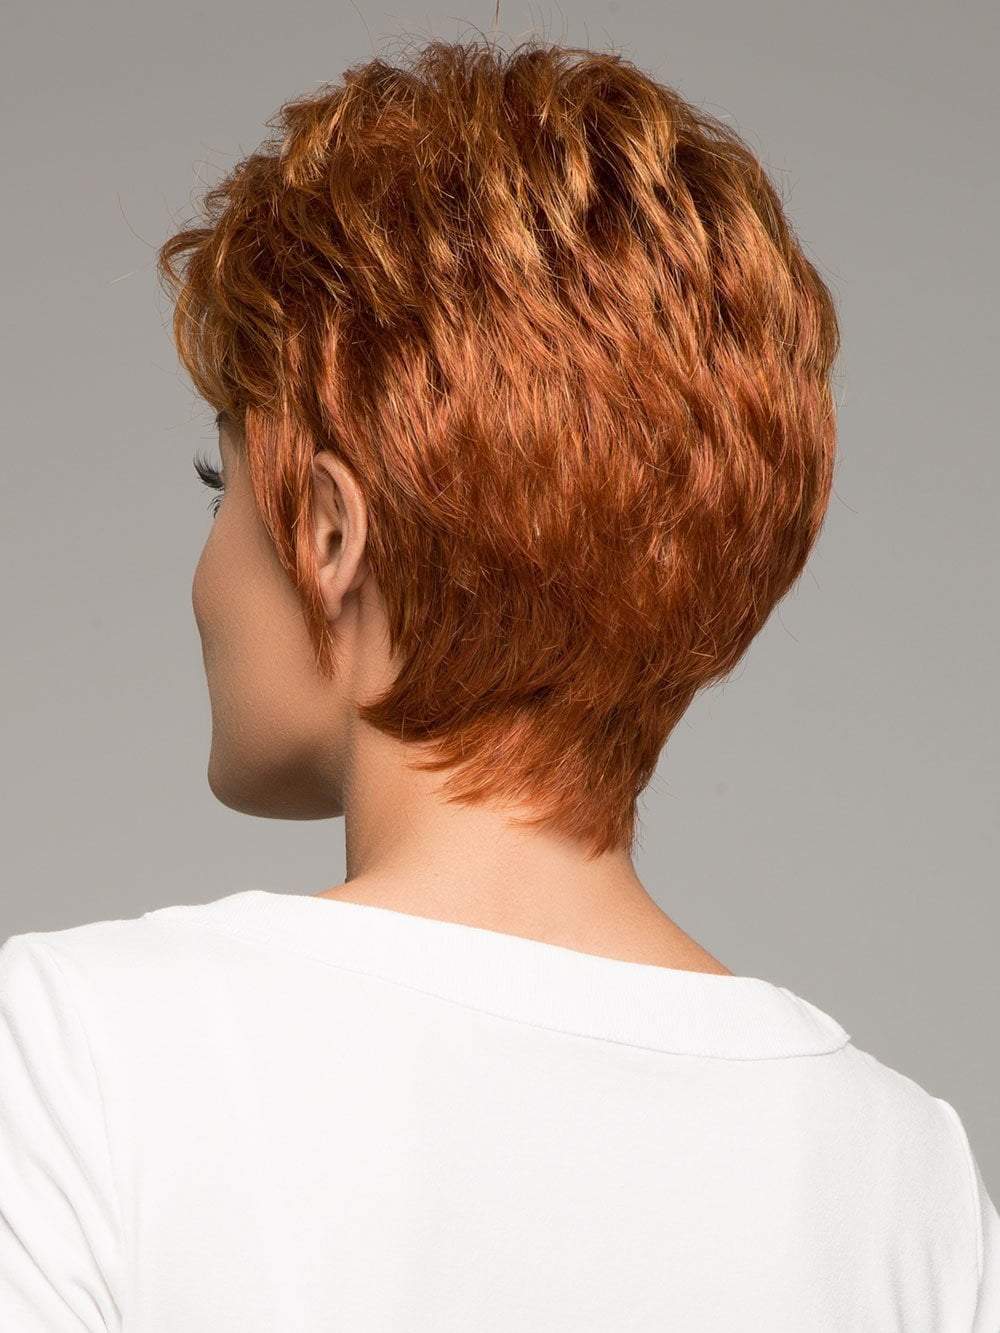 WHISPER by RAQUEL WELCH in R28S GLAZED FIRE | Fiery Red with Bright Red Highlight on Top